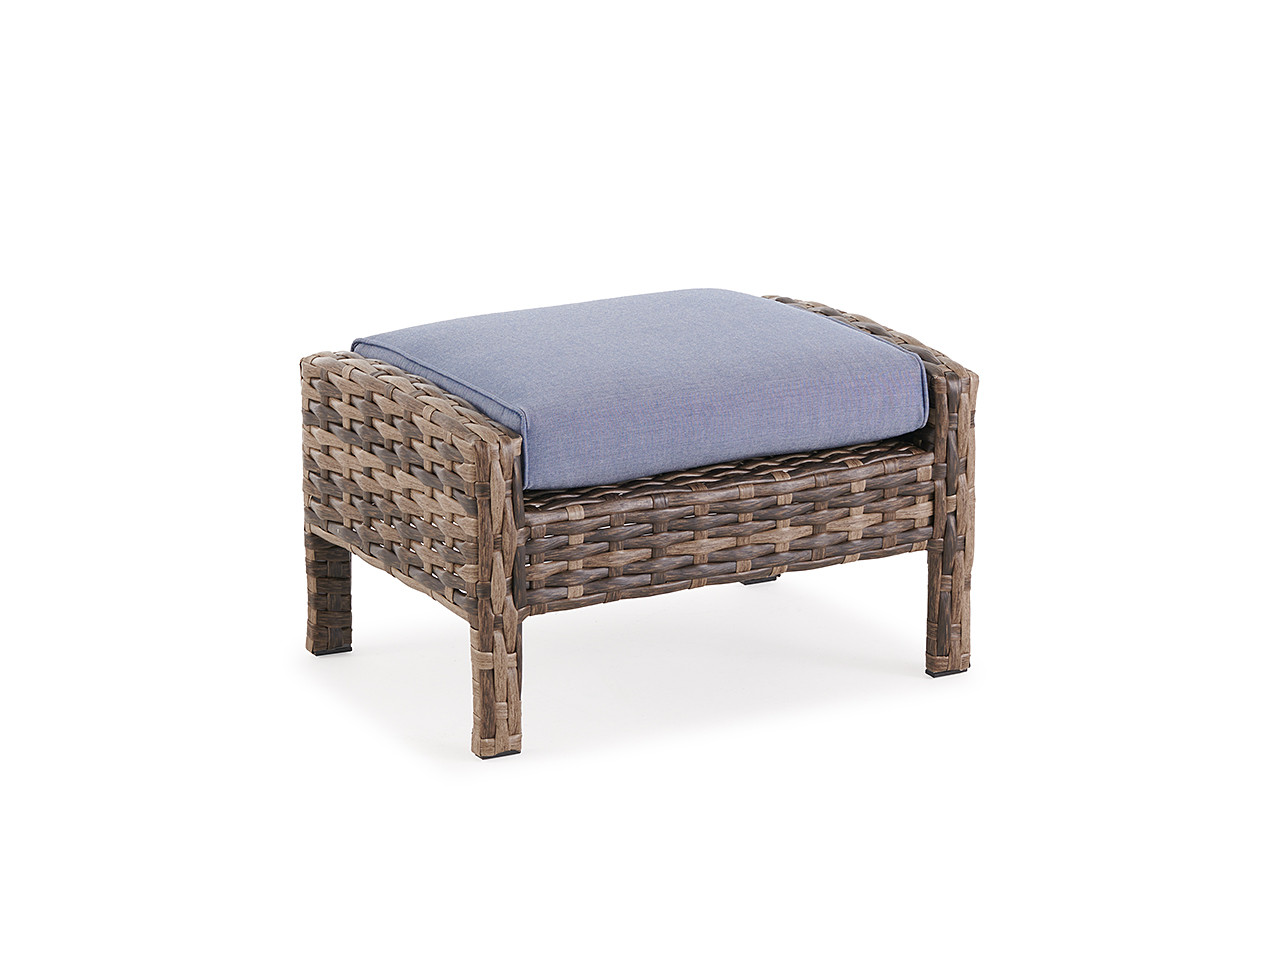 Cabo Caribou Outdoor Wicker and Remy Denim Cushion Ottoman